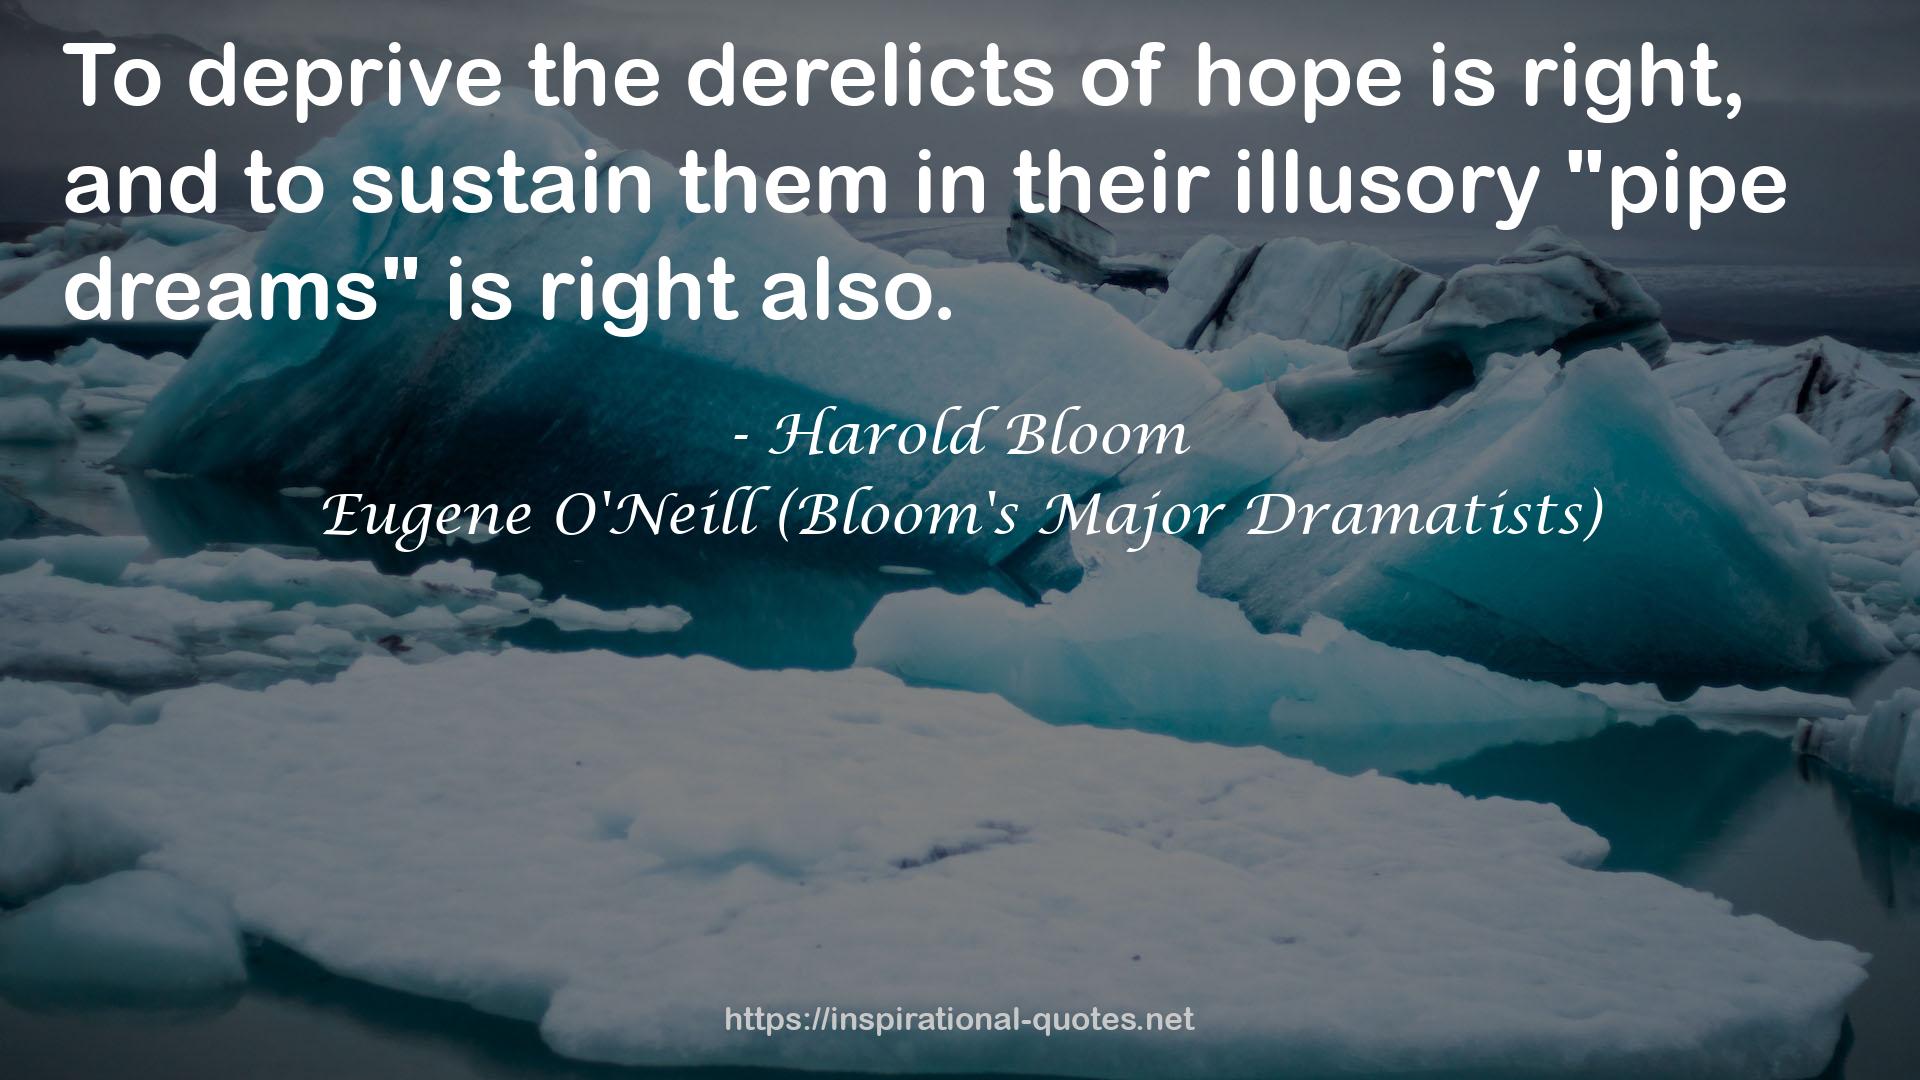 Eugene O'Neill (Bloom's Major Dramatists) QUOTES